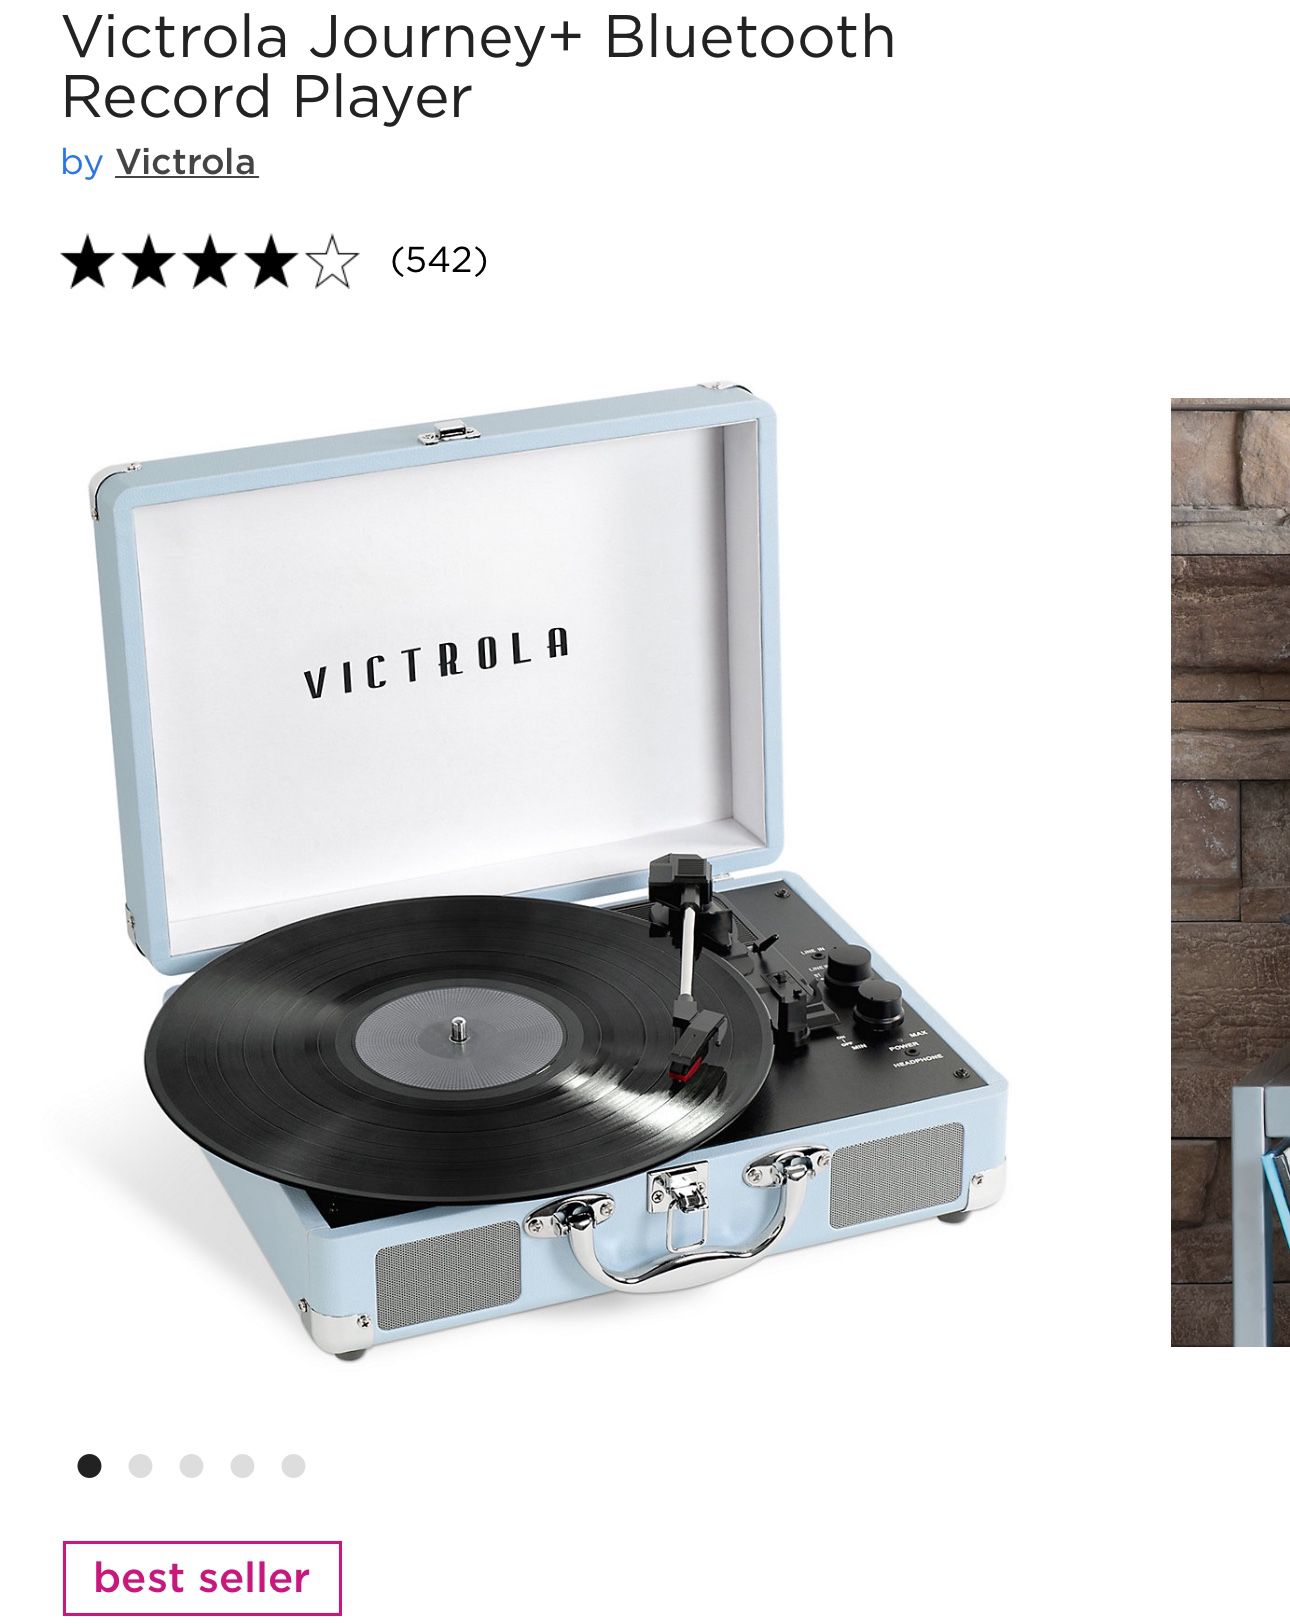 Victrola Record Player Bluetooth & Speakers